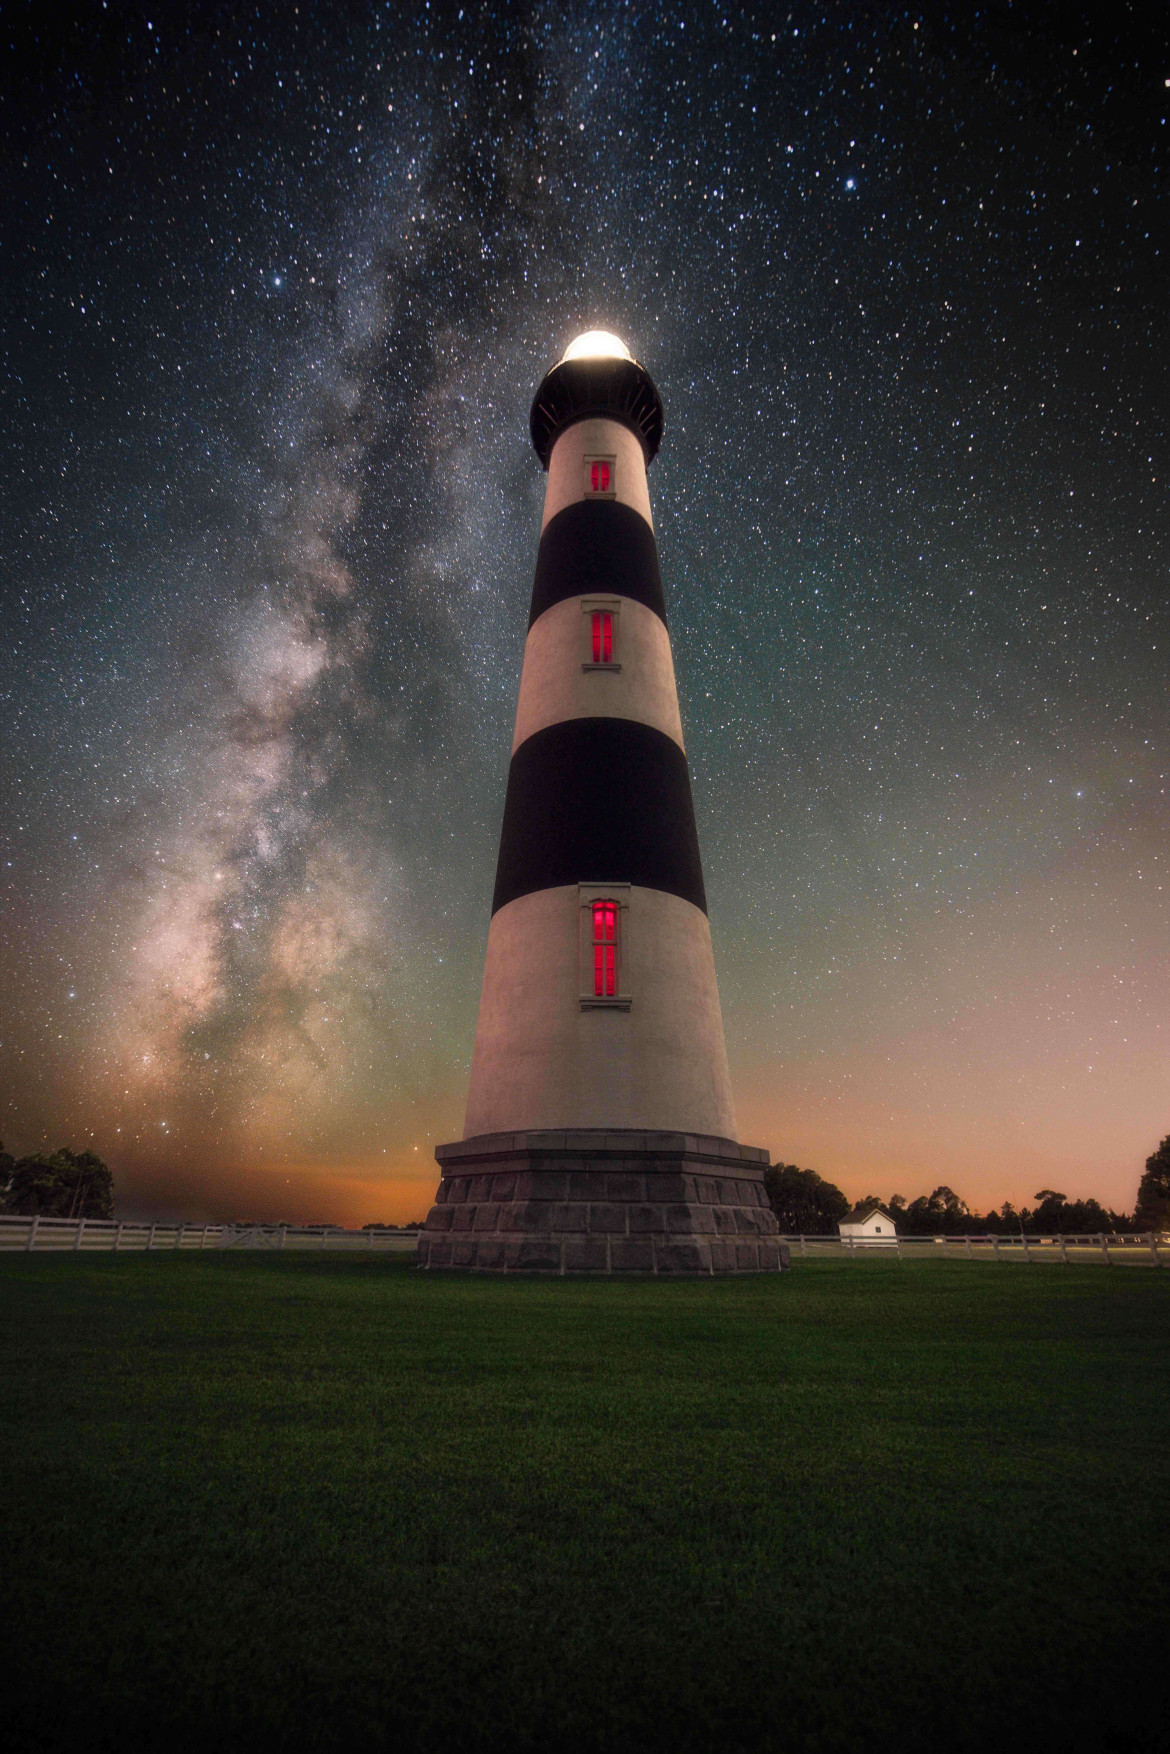 fot. Jason Perry, "Cathing Light" / Insight Investment Astronomy Photographer of the Year 2019